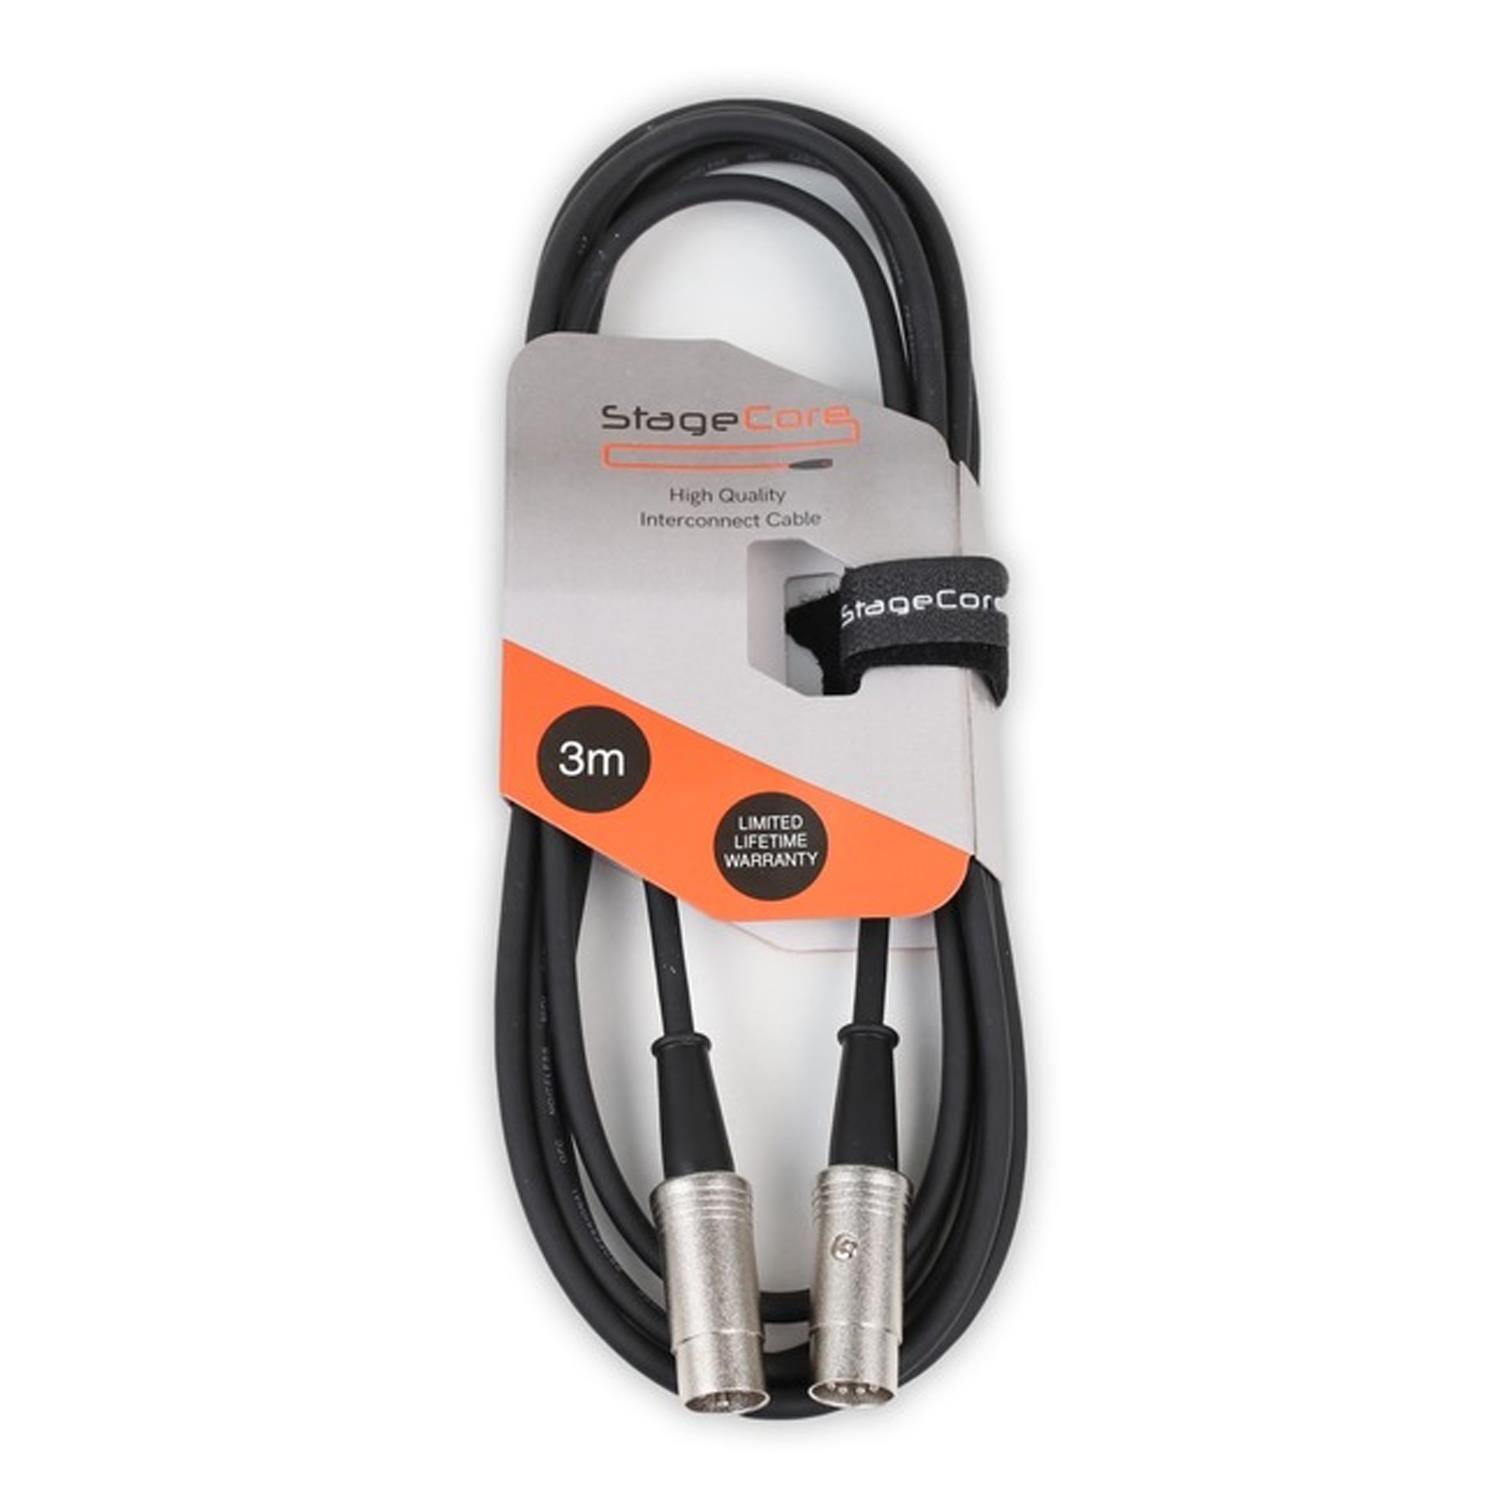 Stagecore 3m 5 Pin DIN to 5 Pin DIN Midi Cable - DY Pro Audio